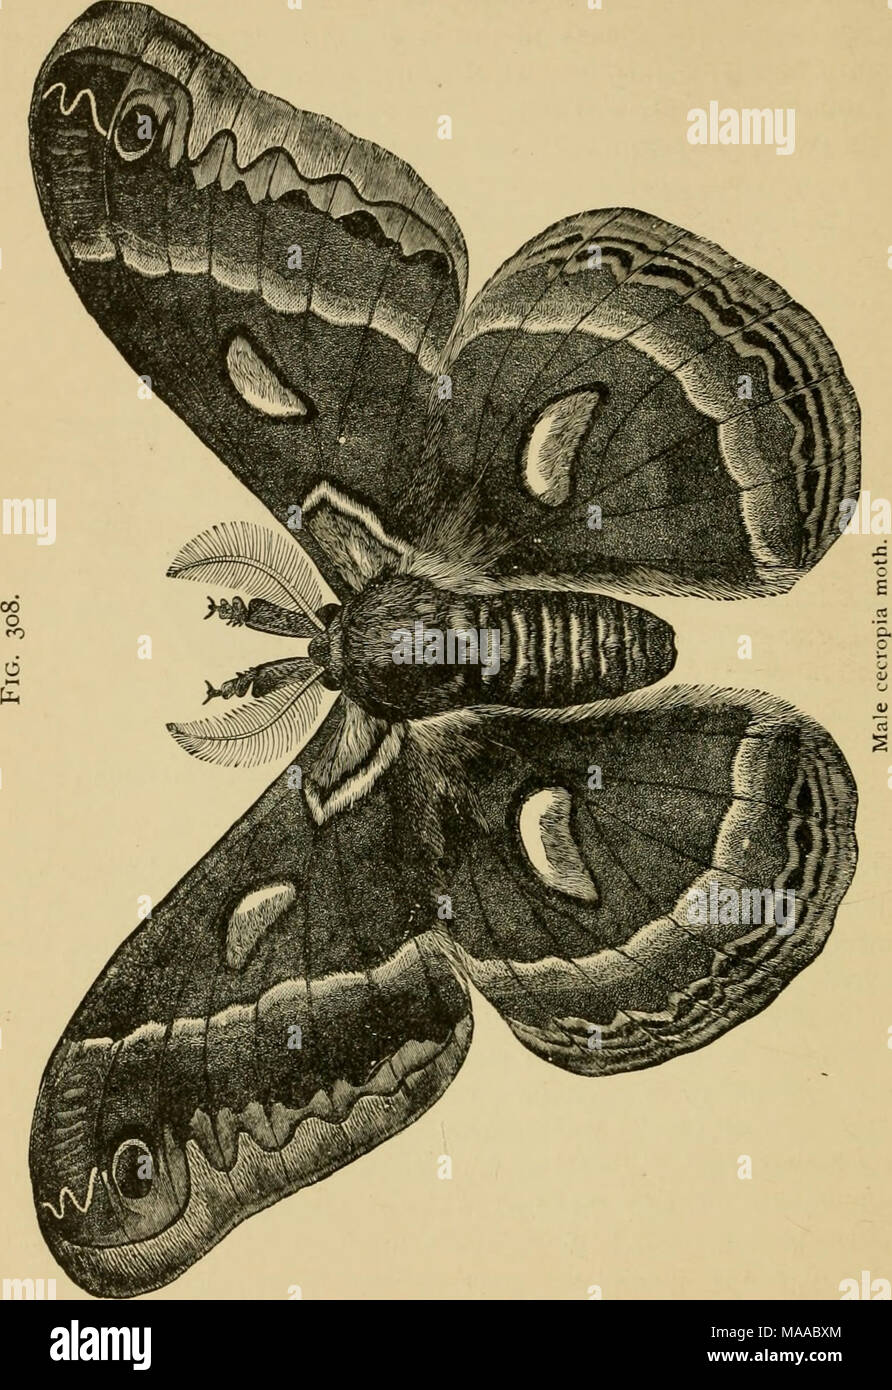 . Economic entomology for the farmer and the fruit grower, and for use as a text-book in agricultural schools and colleges; . is the cecropia, Platysamia cecropia, the caterpillar occurring on a great variety of plants, including many of our fruit-trees and Stock Photo